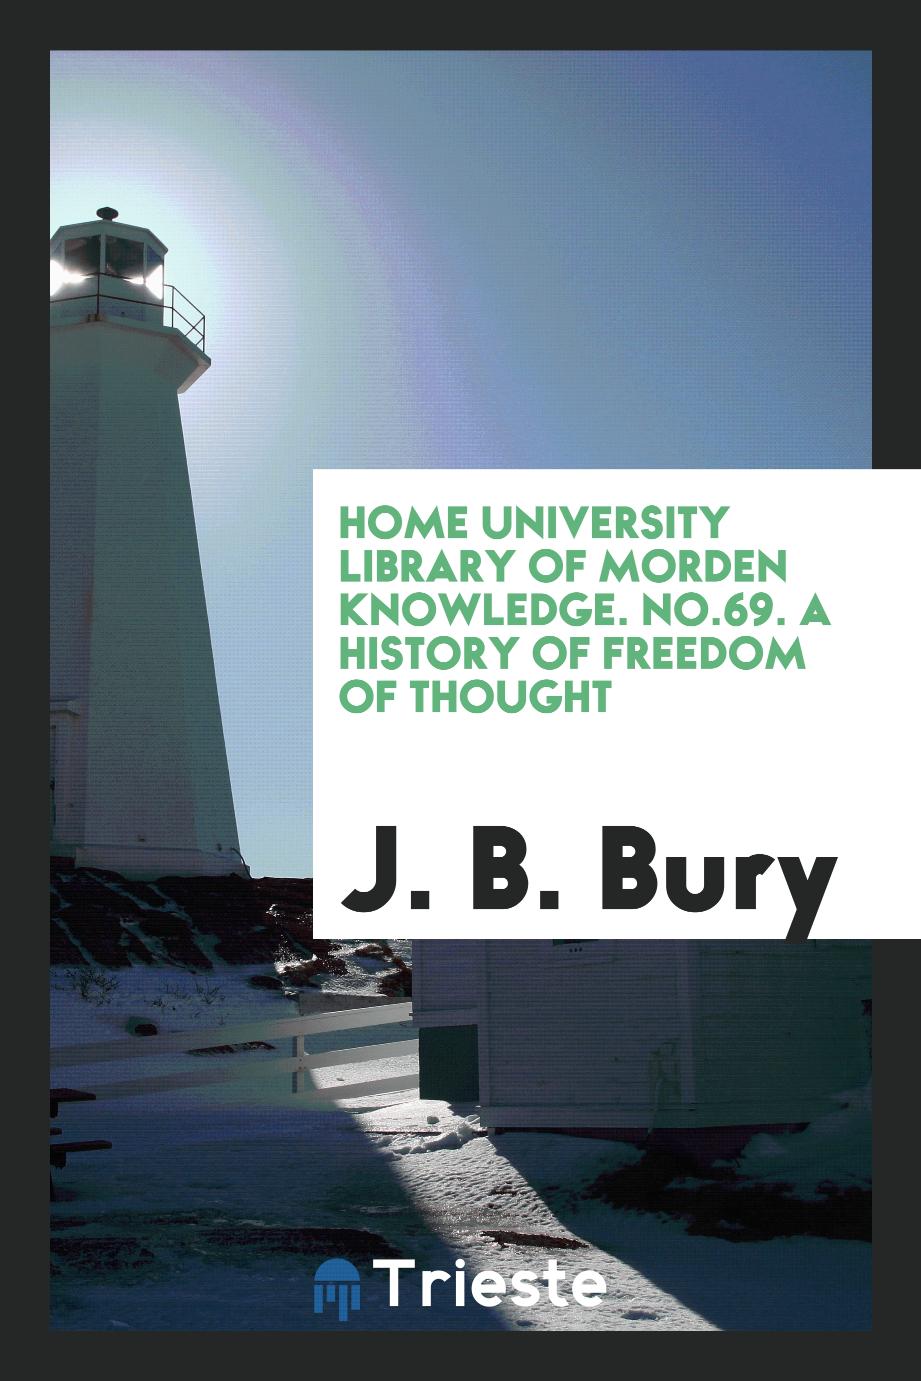 Home university library of morden knowledge. No.69. A history of freedom of thought